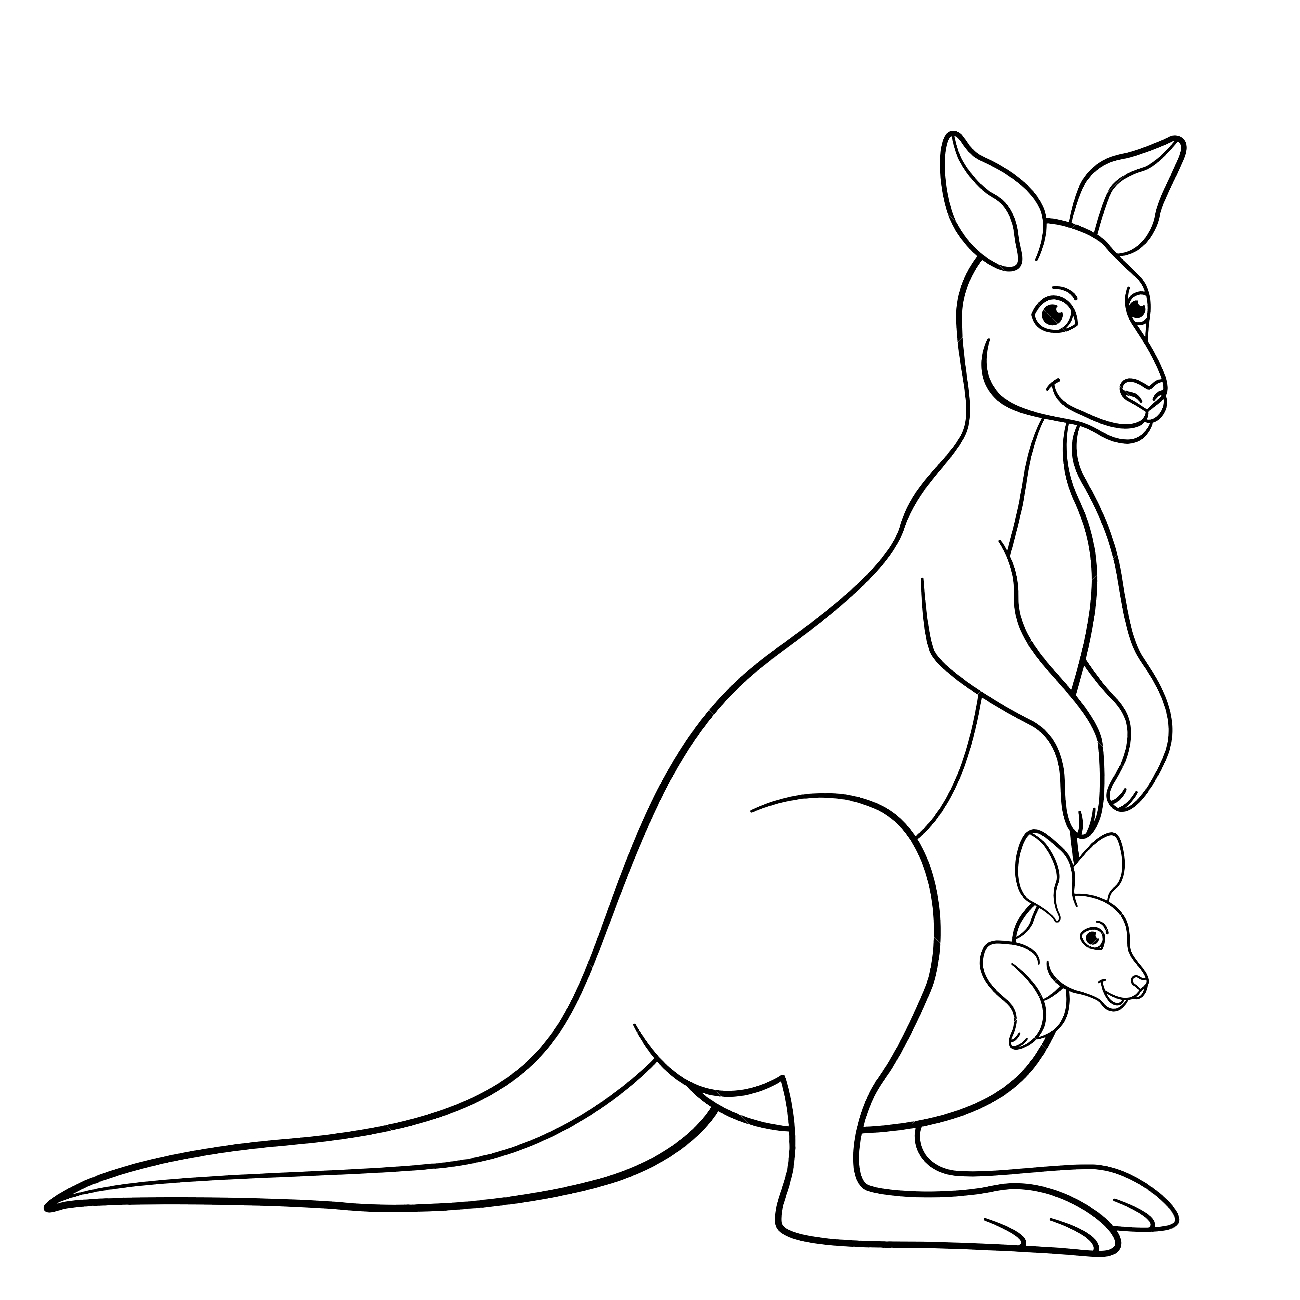 Drawing 15 from Kangaroos coloring page to print and coloring